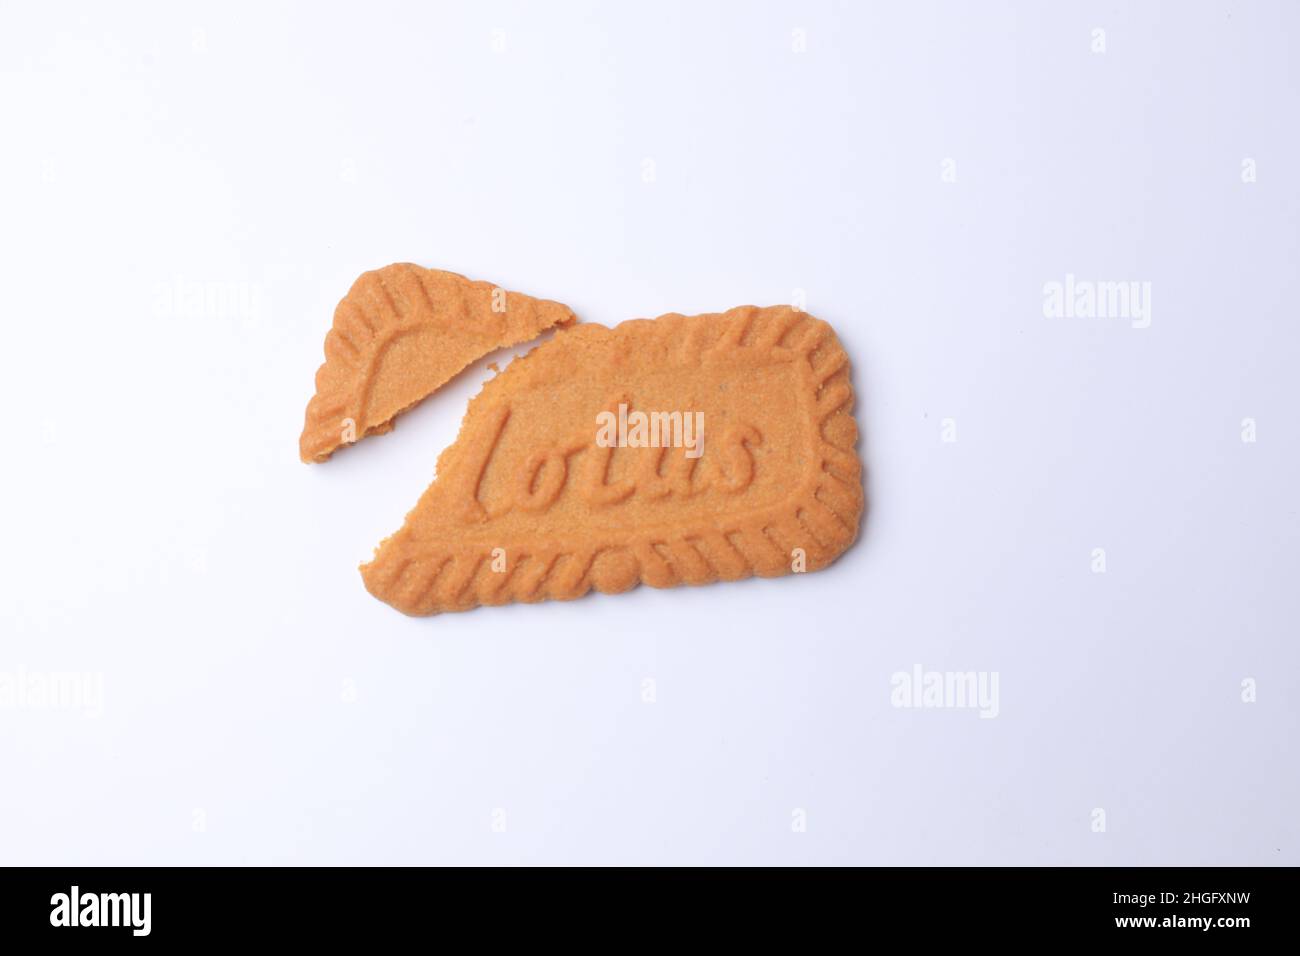 SIDOARJO - EAST JAVA, January 16, 2022: Lotus Biscoff is a caramelized biscuit, smooth and crunchy textures on white background. Copy space. Stock Photo